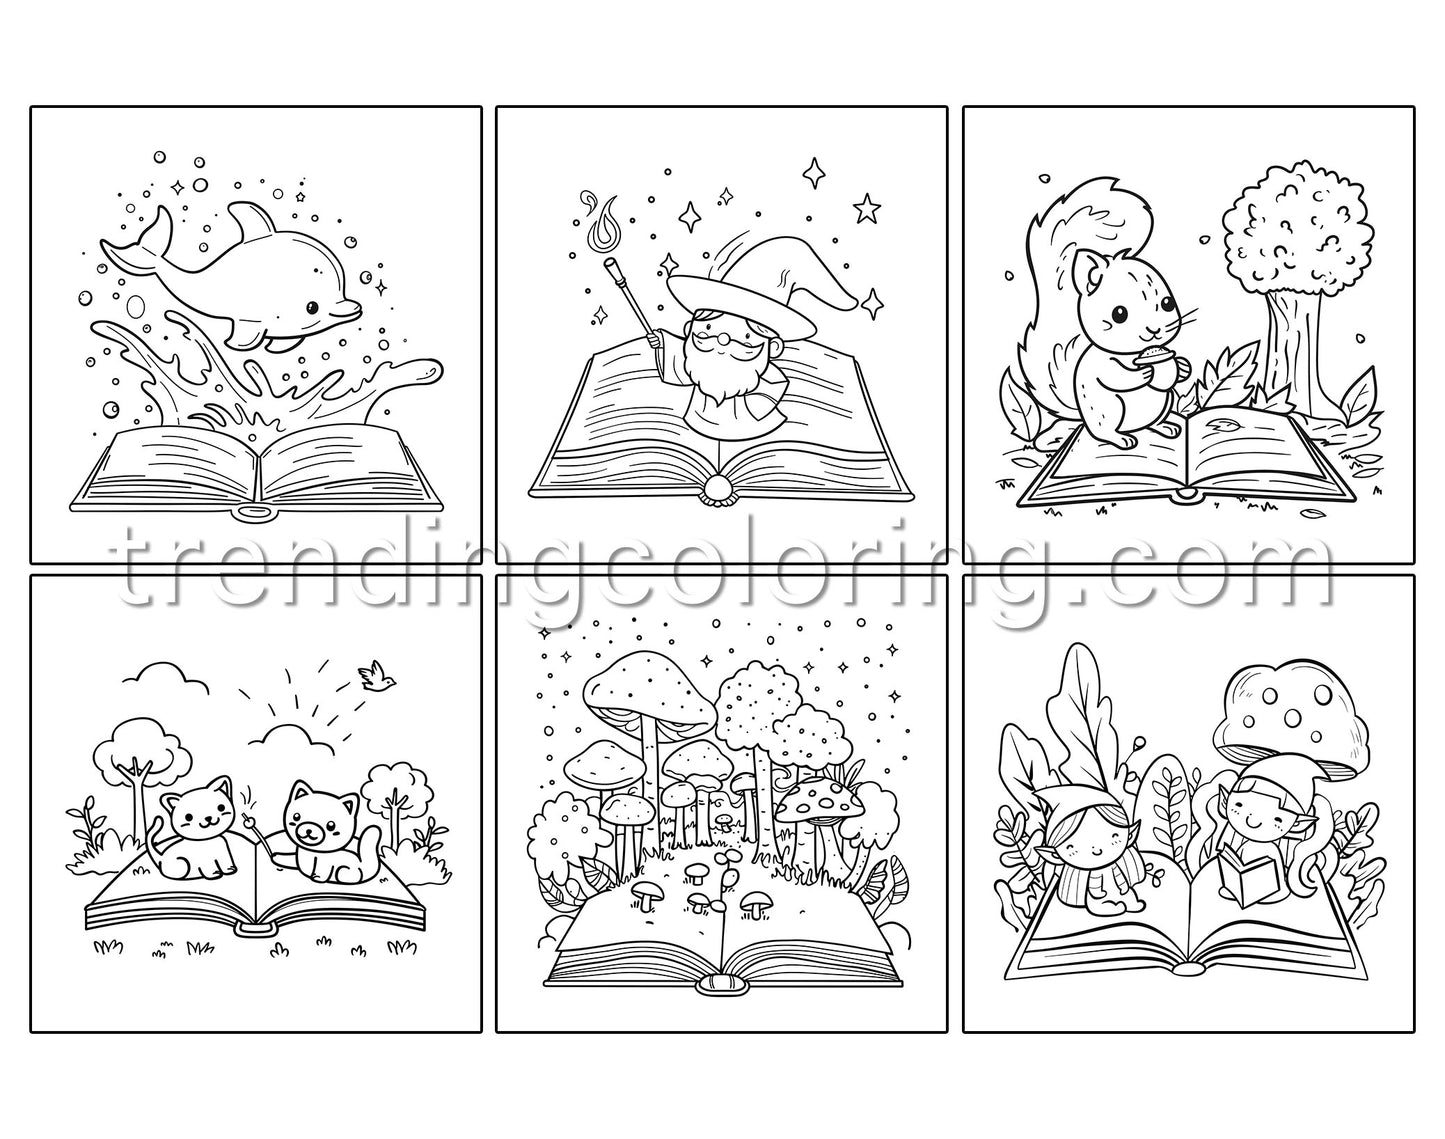 50 Simple Open Magic Book Coloring Pages - Instant Download - Printable PDF